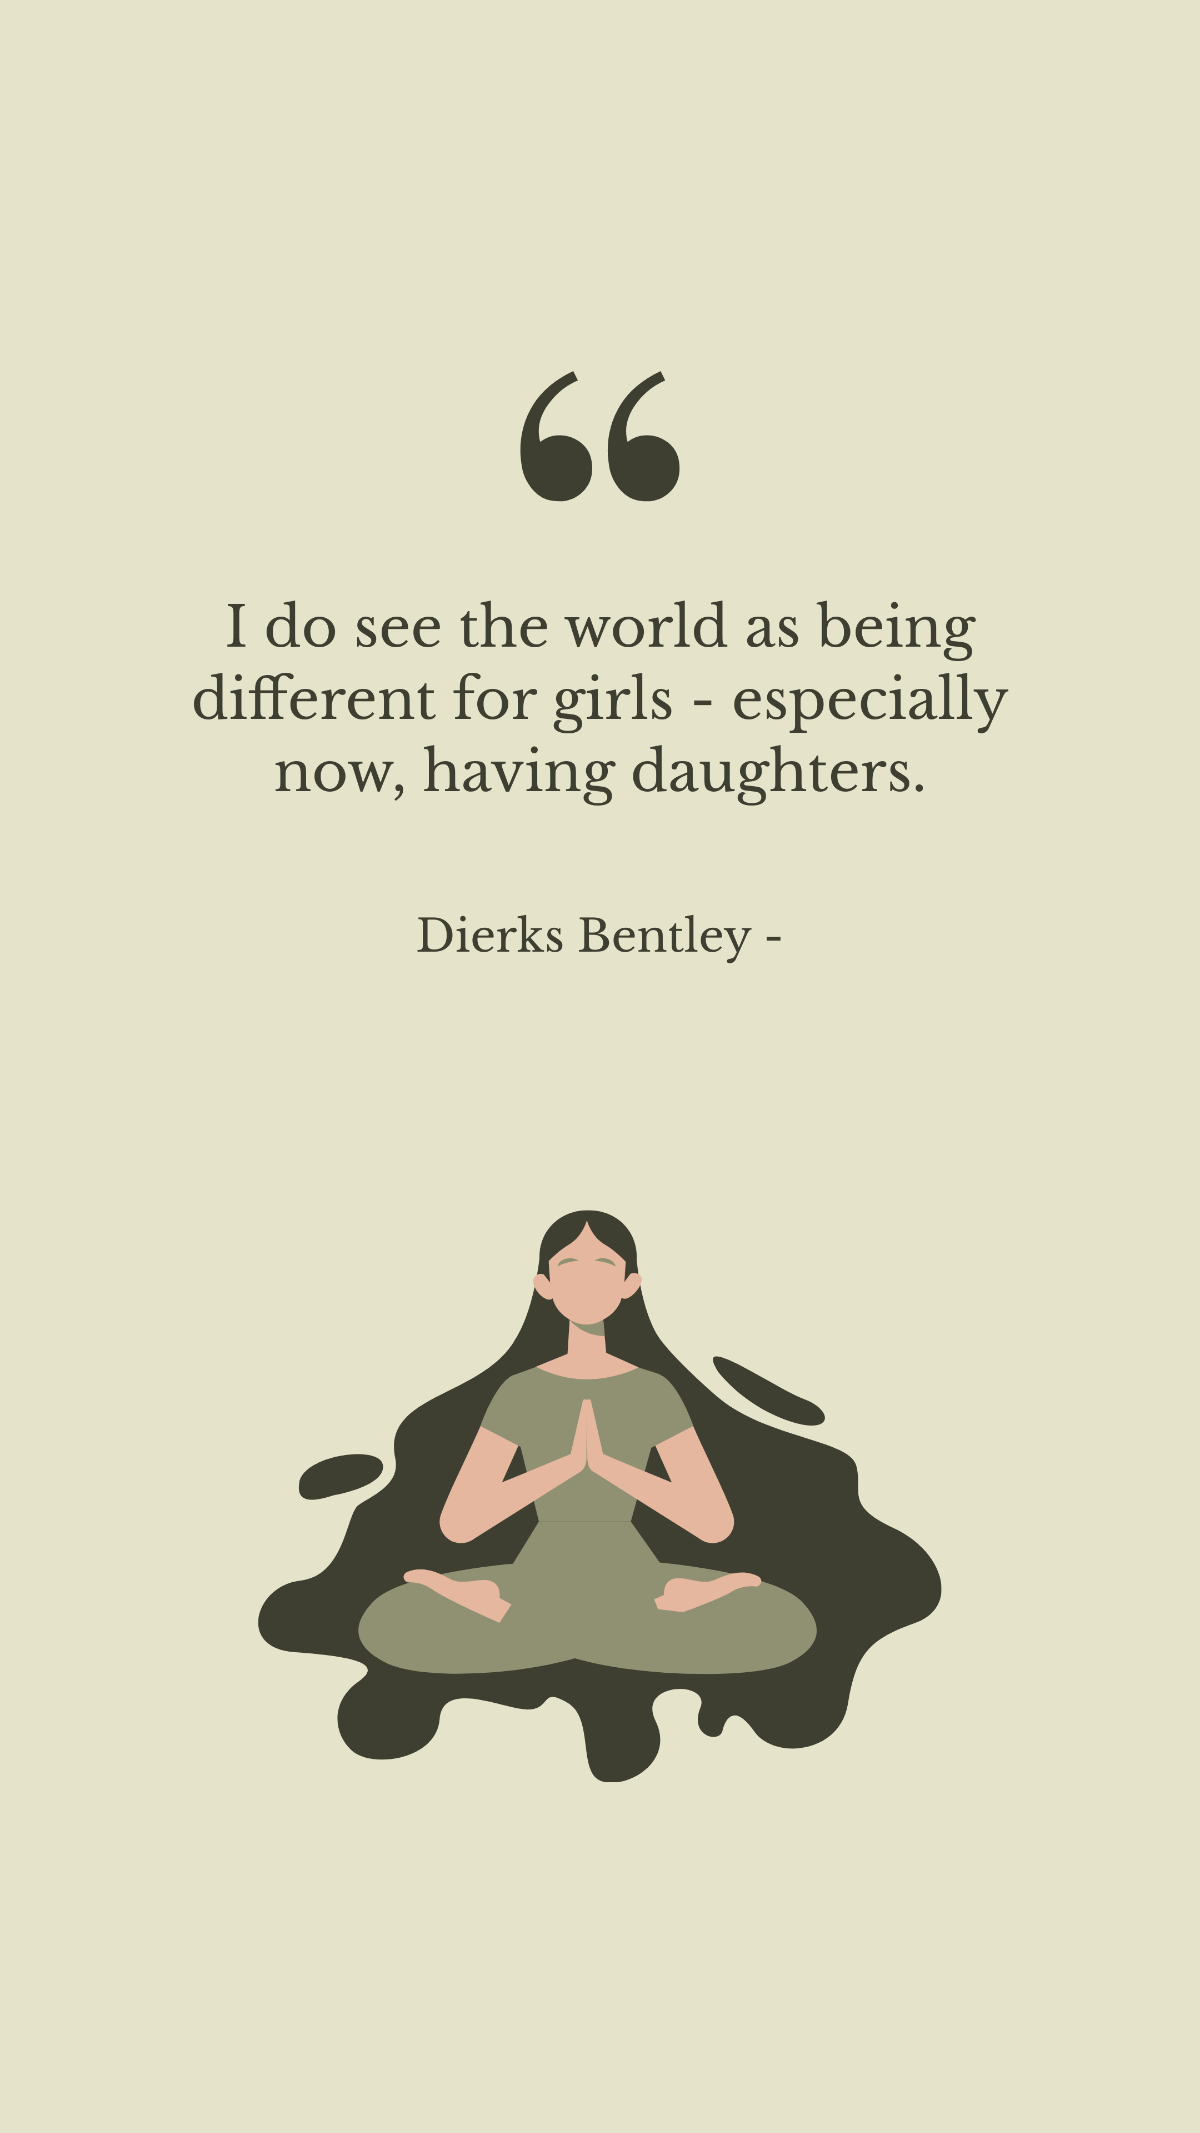 Dierks Bentley - I do see the world as being different for girls - especially now, having daughters. Template